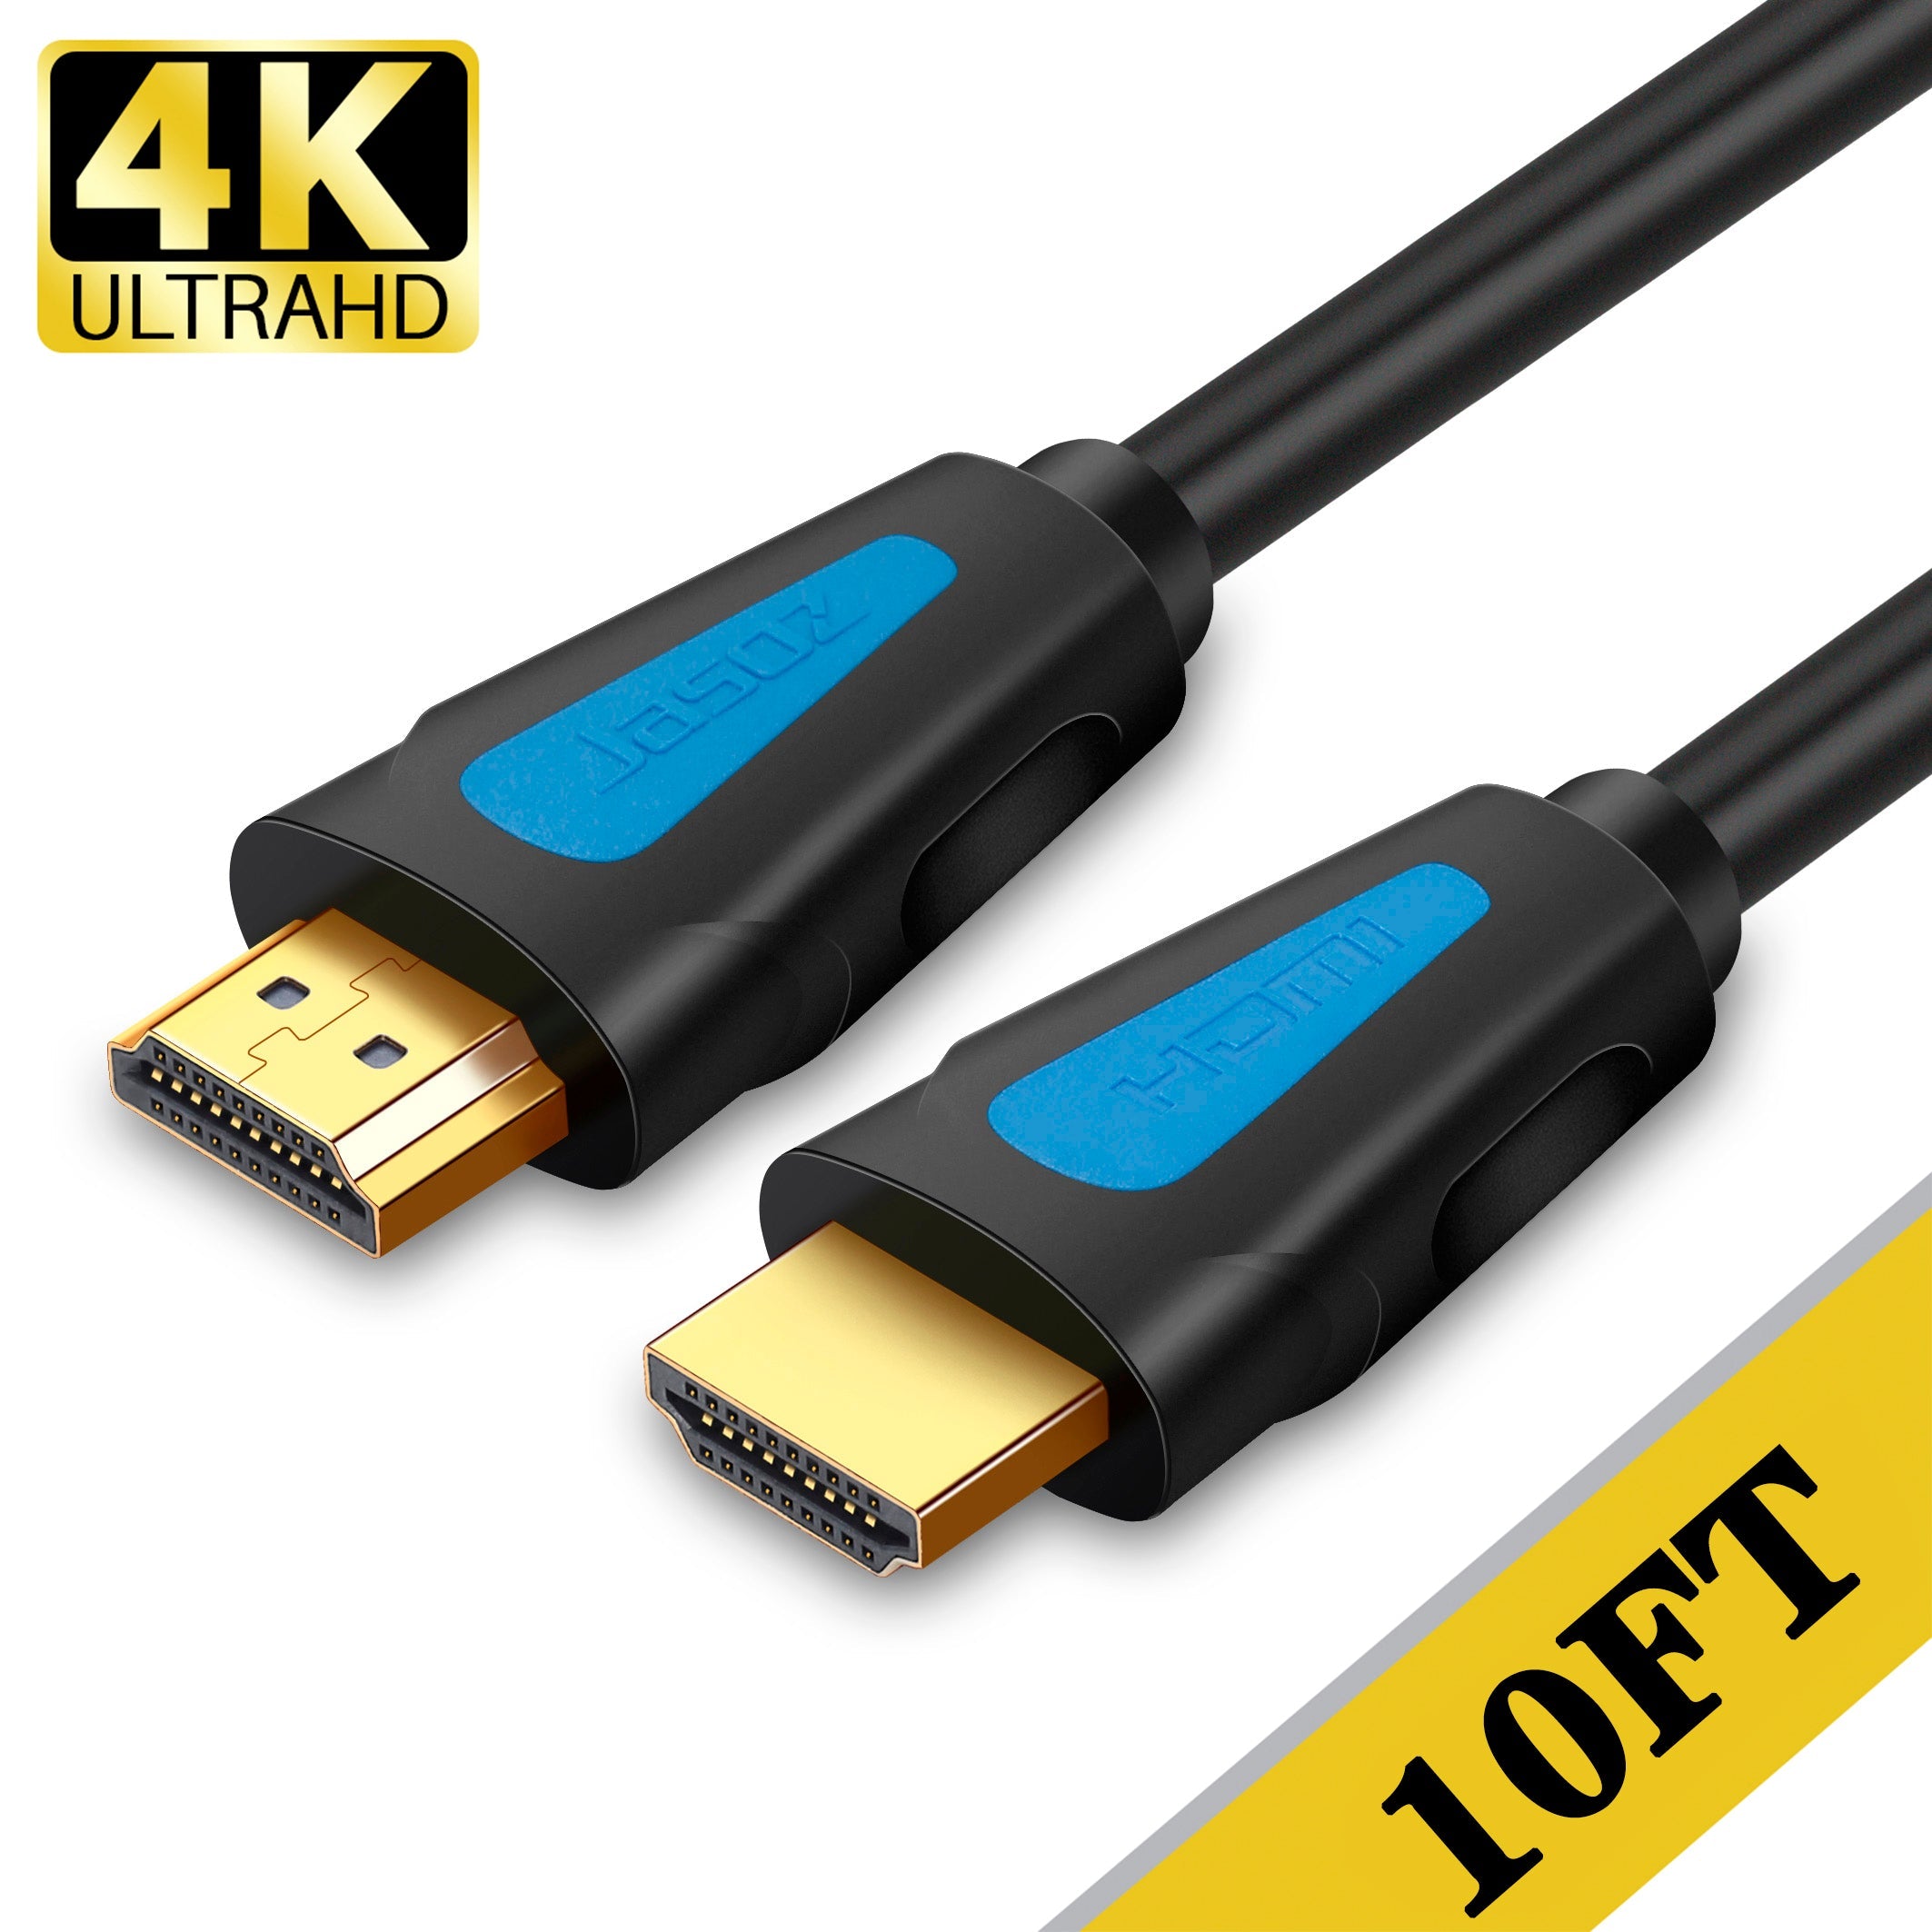 4K HDMI Cable 10ft, Gold-plated Connectors High Speed 18Gbps HDMI 2.0 Cable, 4K 60Hz / 2K 144Hz,Ultra HD,2160P, 1080P, ARC